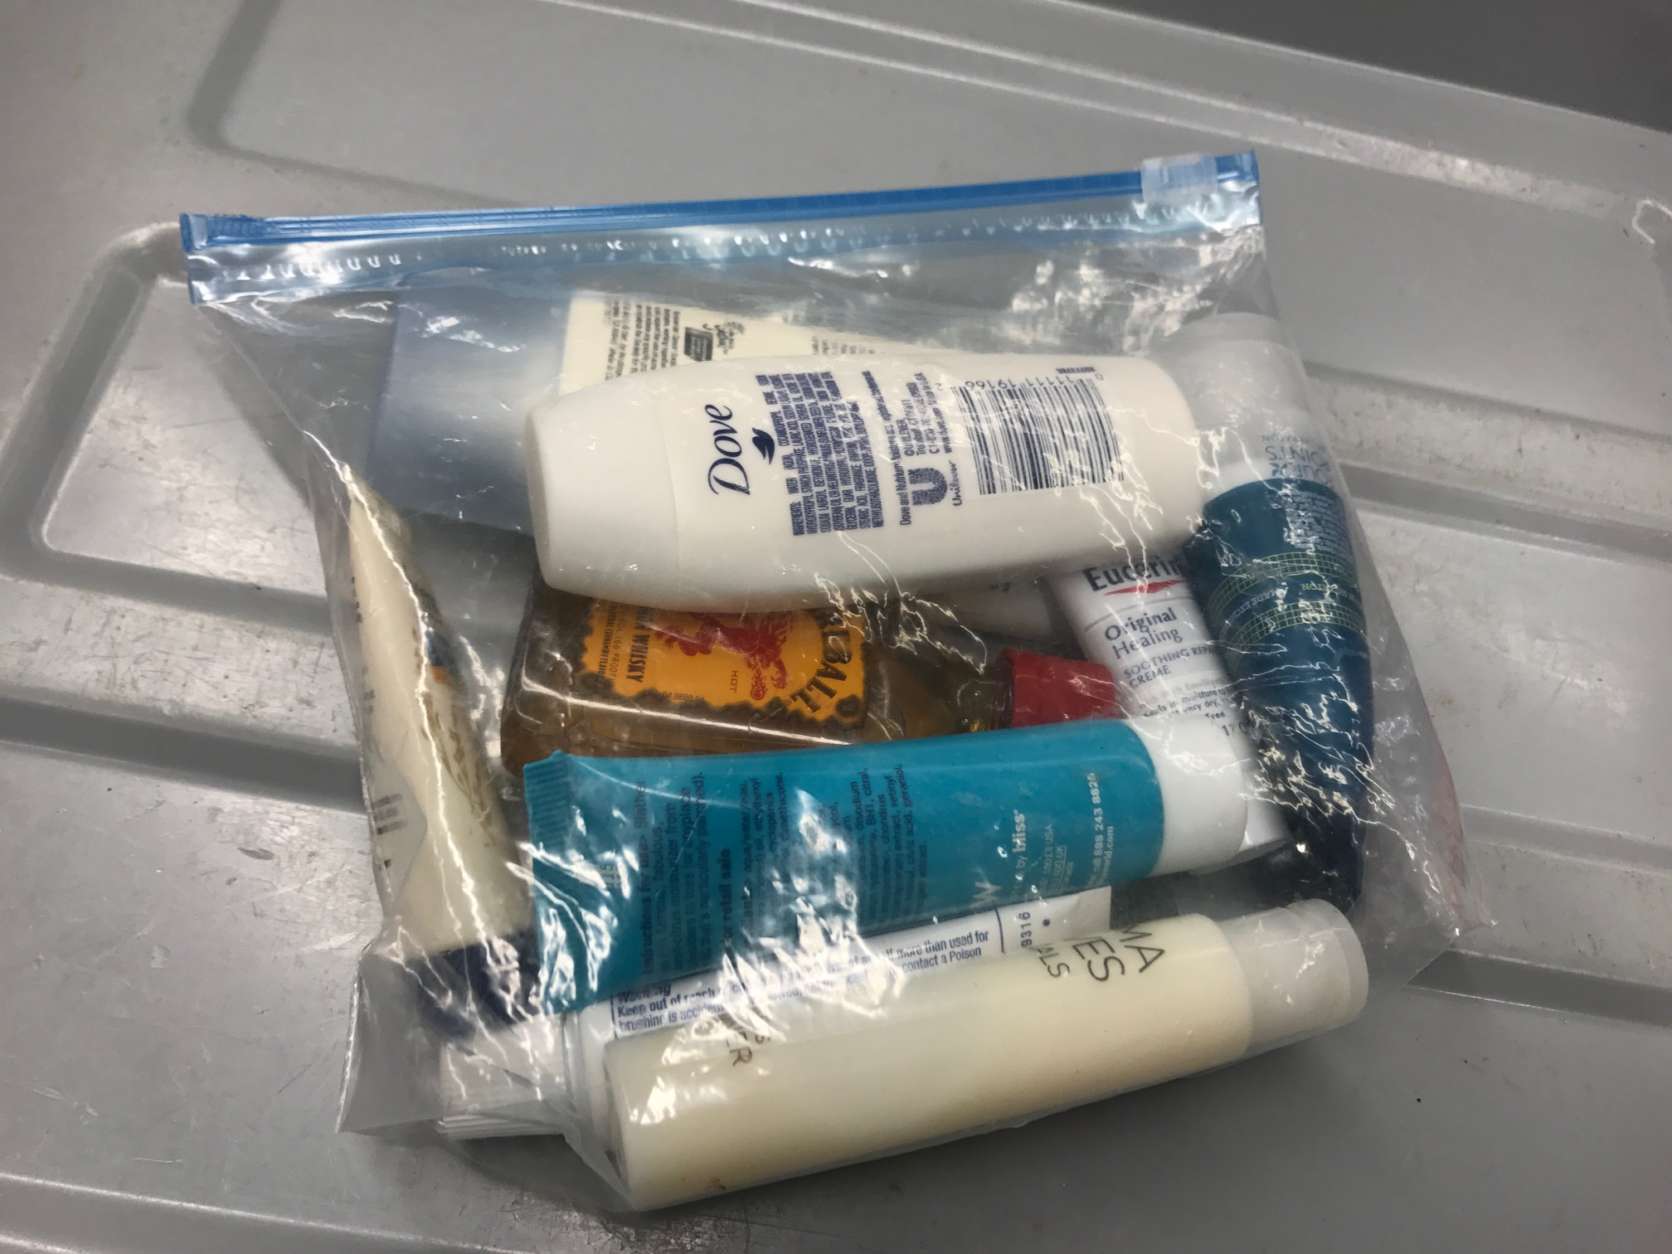 The 3-1-1 liquids rule says liquids, aerosols, gels, creams and pastes can be carried on, if the container holds 3.4 ounces or less. One clear, plastic zip-top bag per passenger. (WTOP/Neal Augenstein)